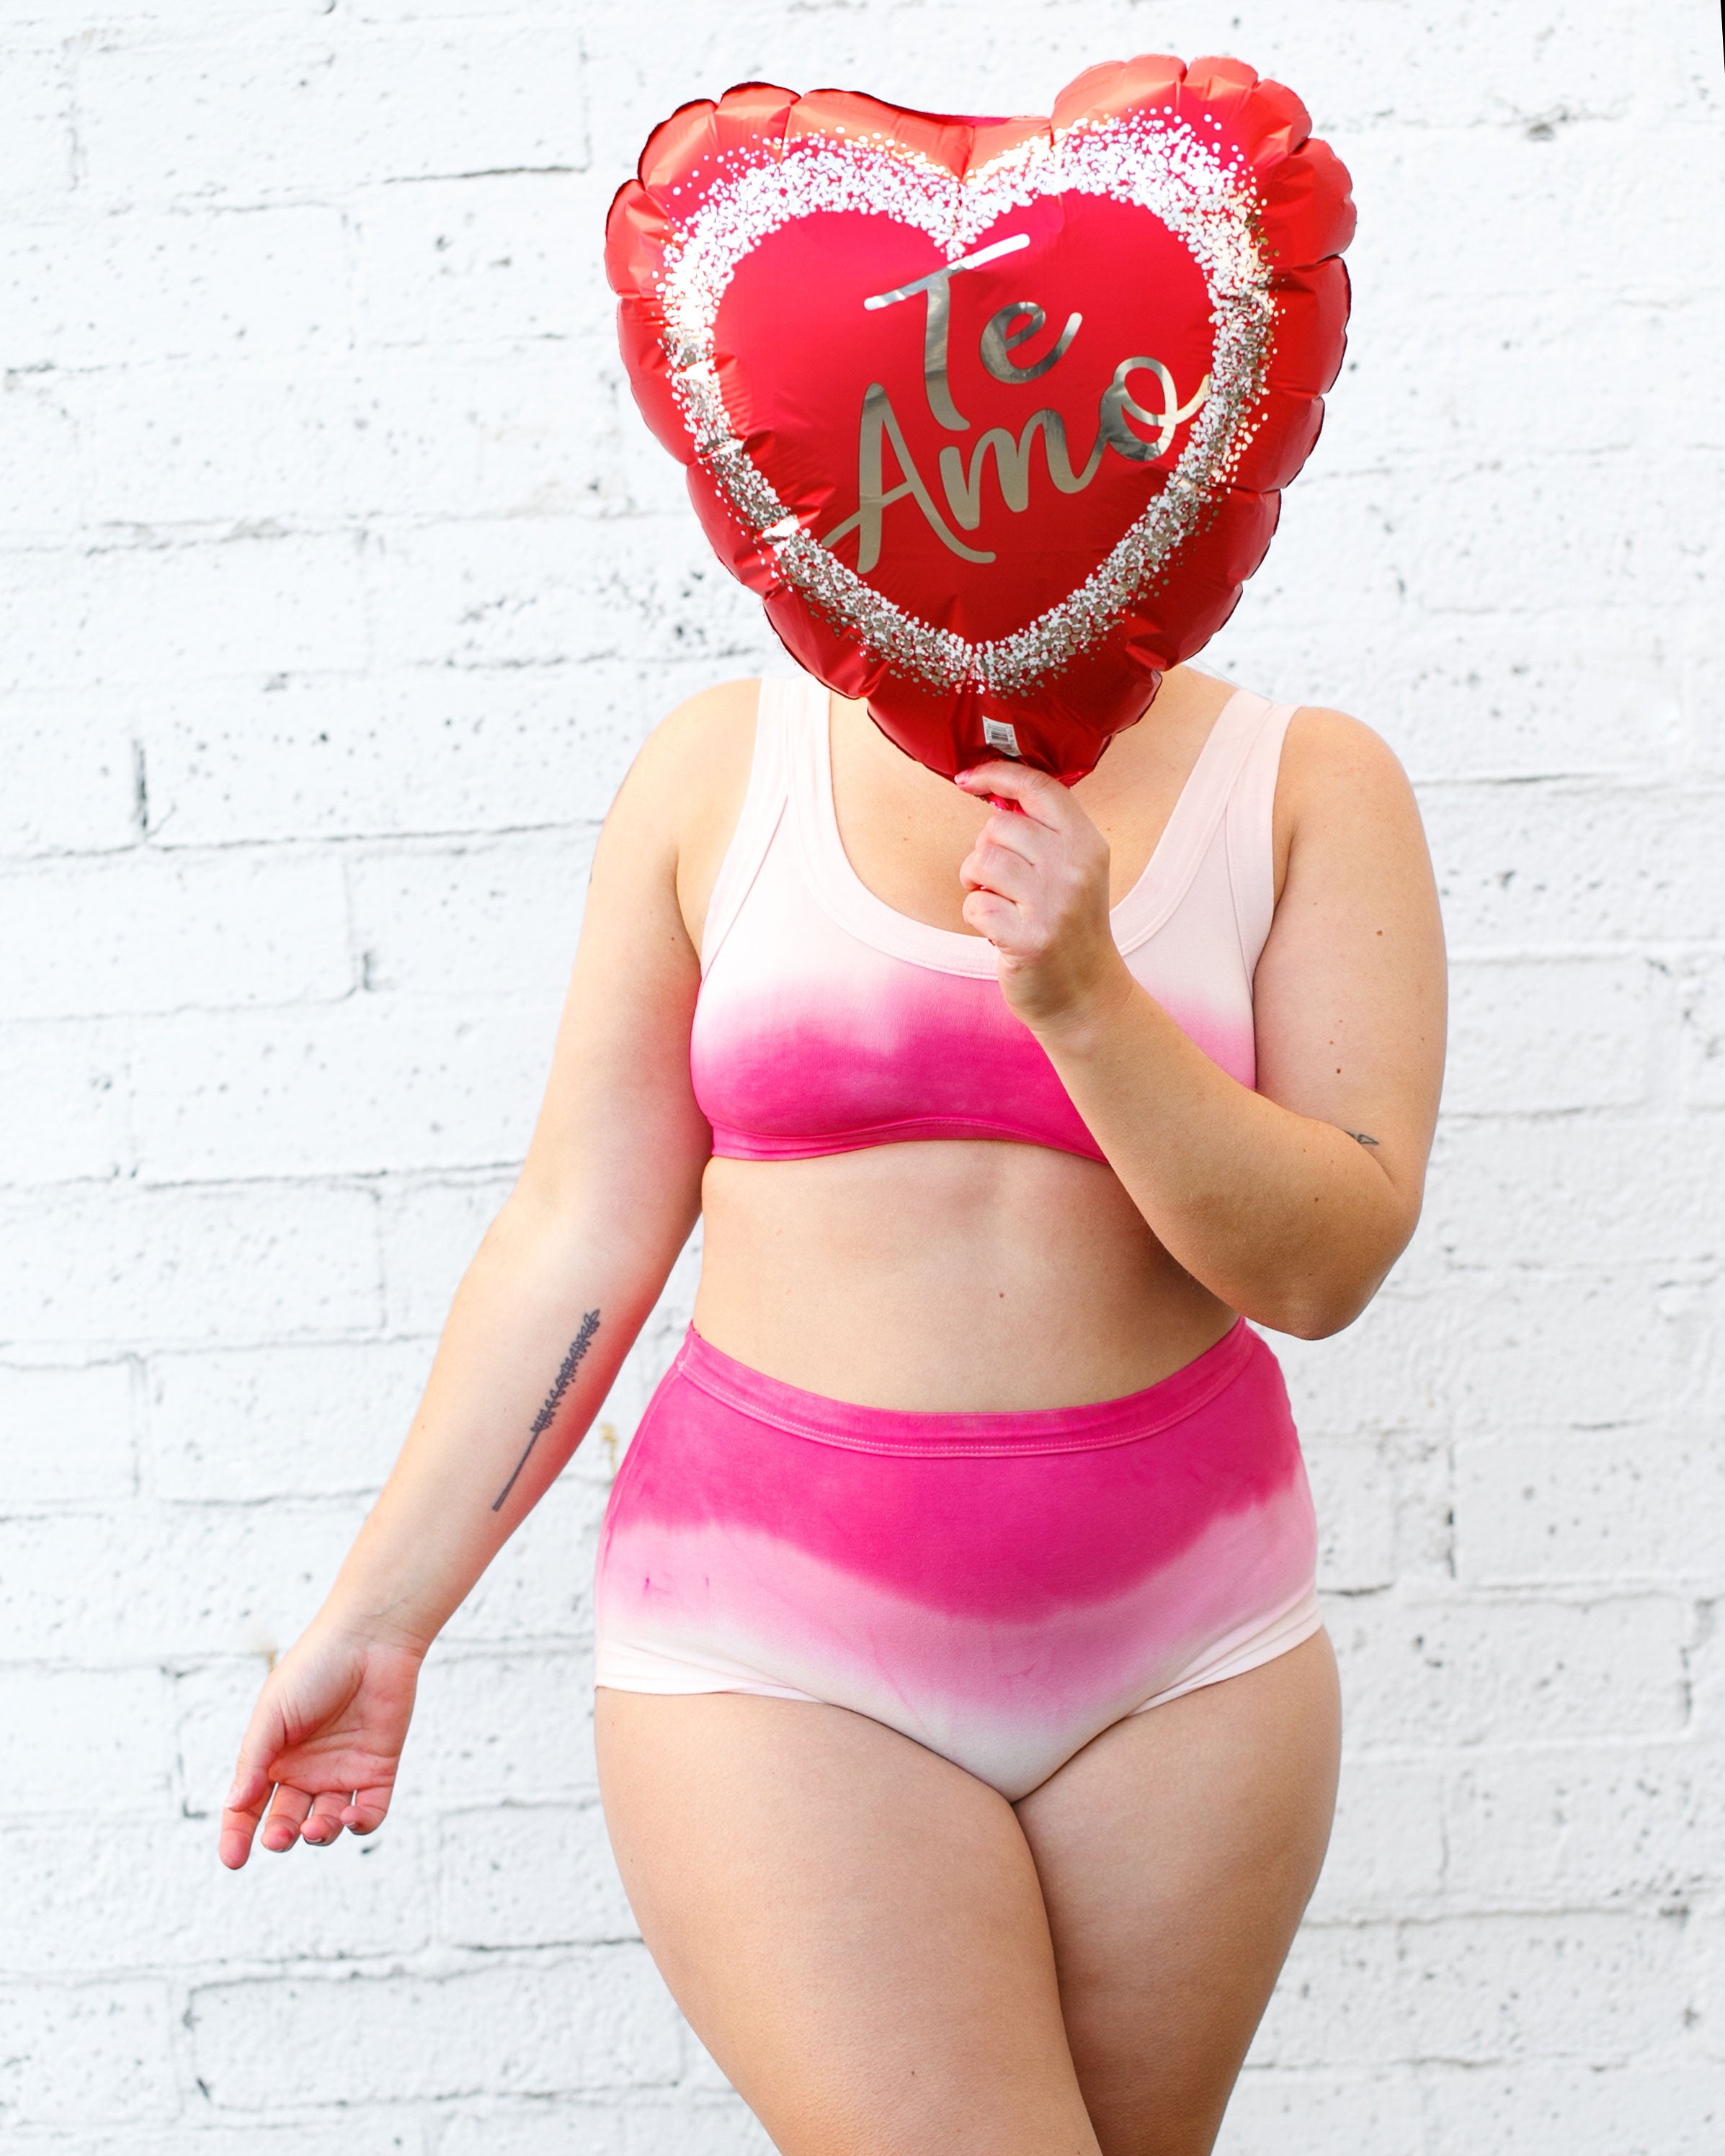 Model wearing Thunderpants organic cotton Bralette and Original underwear in Valentine's Day Dip Dye ombre pinks with a heart balloon over the face.